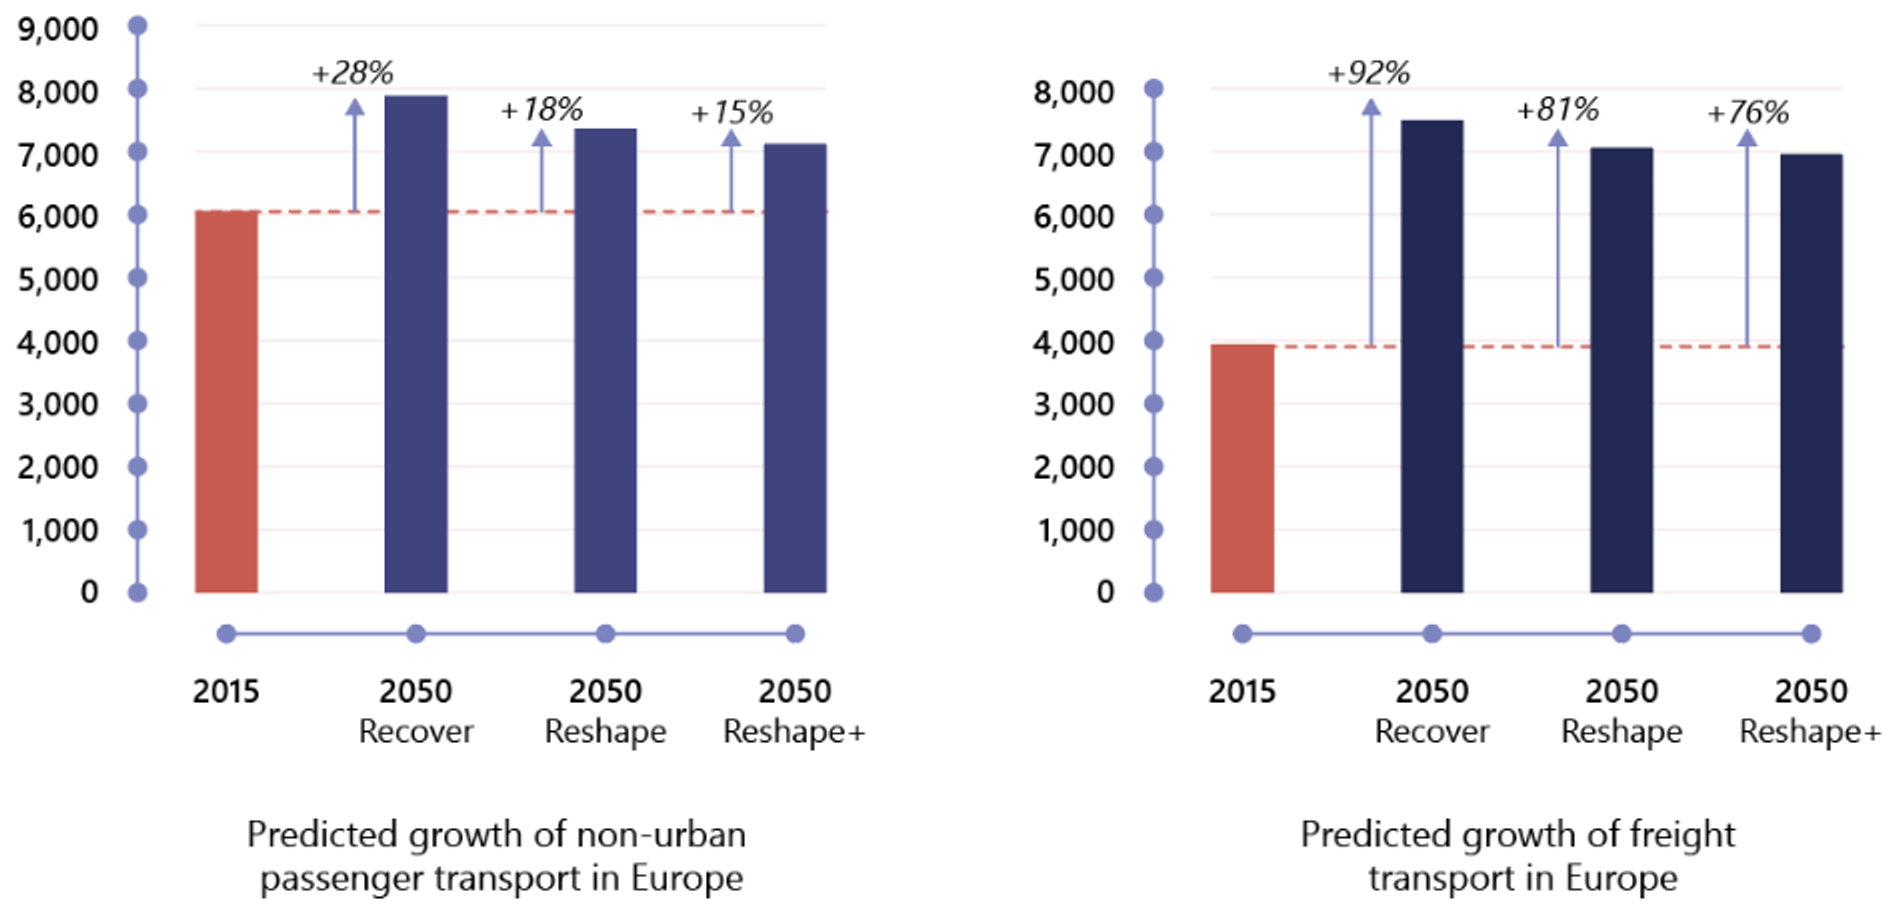 Predicted growth of non-urban passenger transportation and freight transportation in Europe.